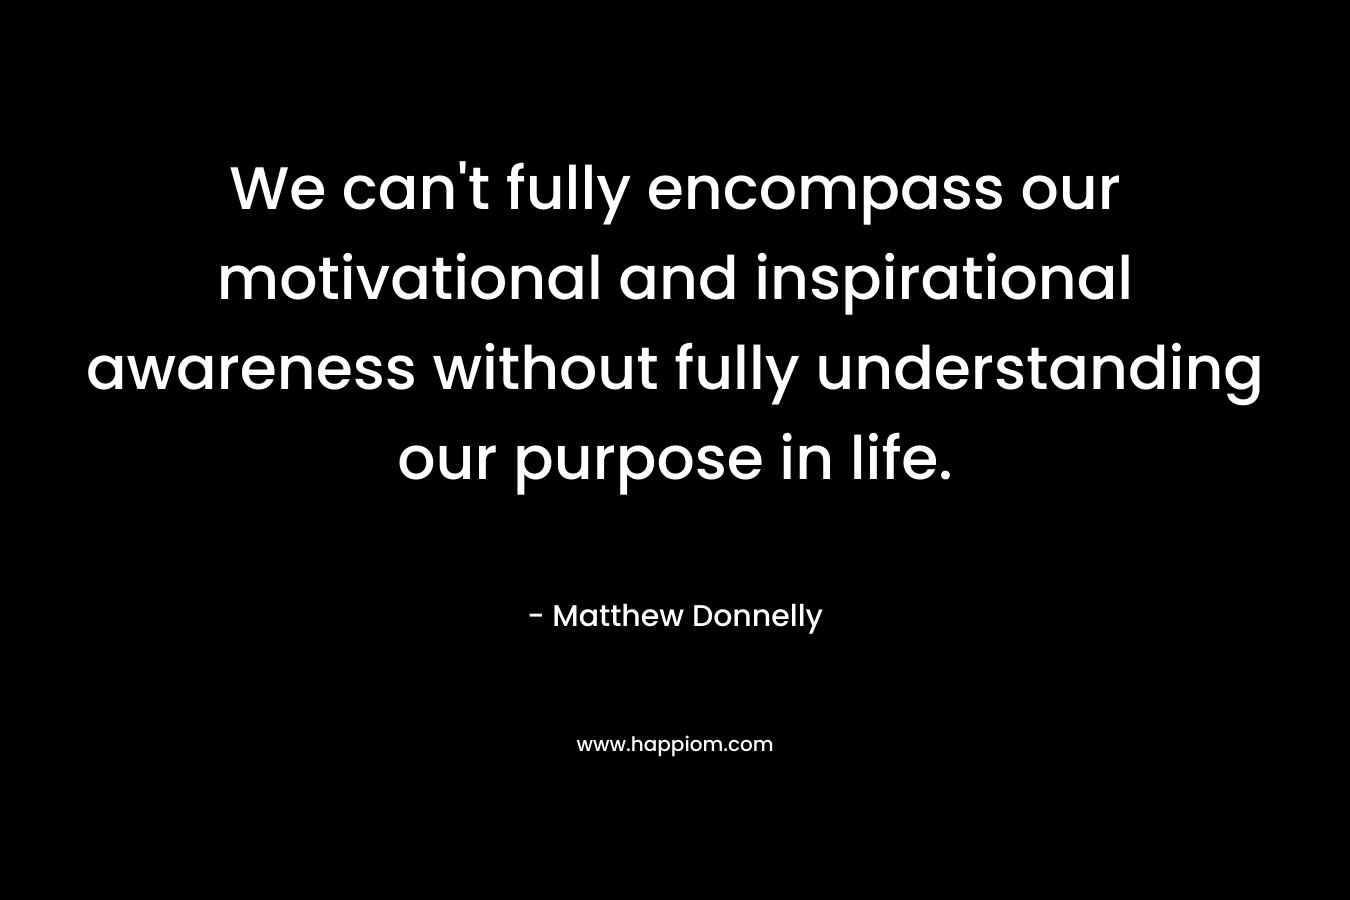 We can't fully encompass our motivational and inspirational awareness without fully understanding our purpose in life.